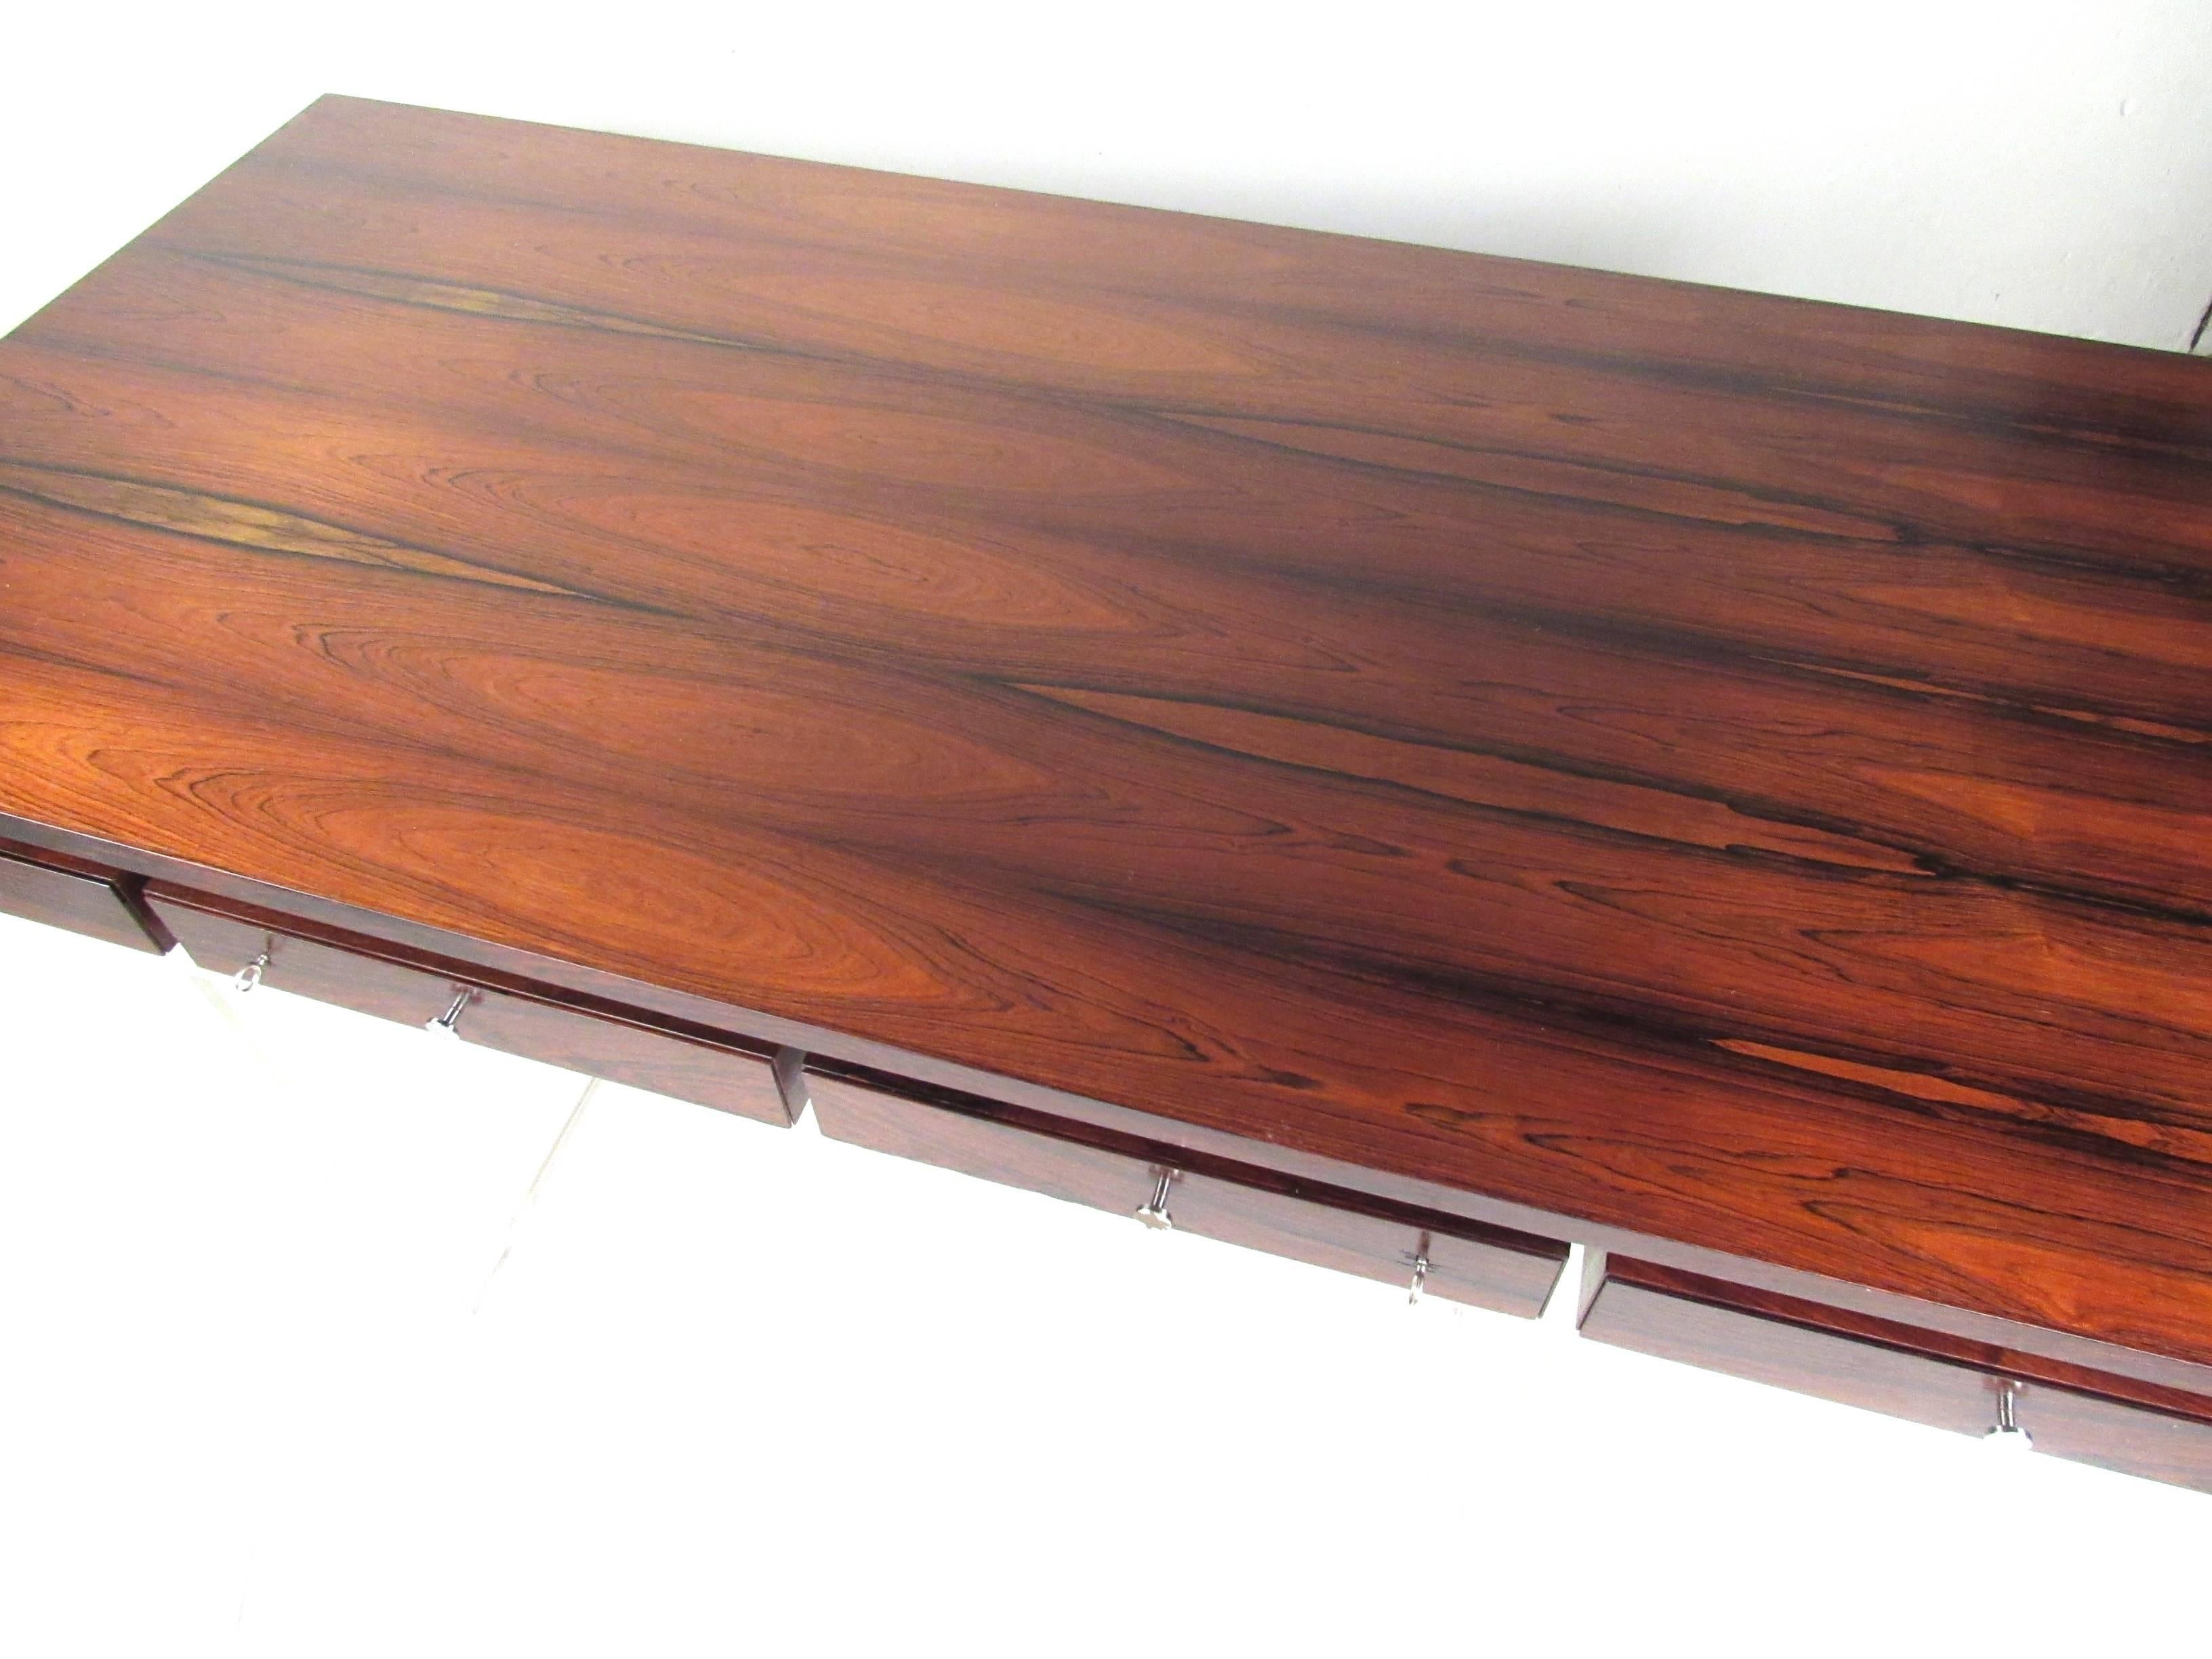 Mid-20th Century Danish Modern Rosewood Desk by Poul Norreklit